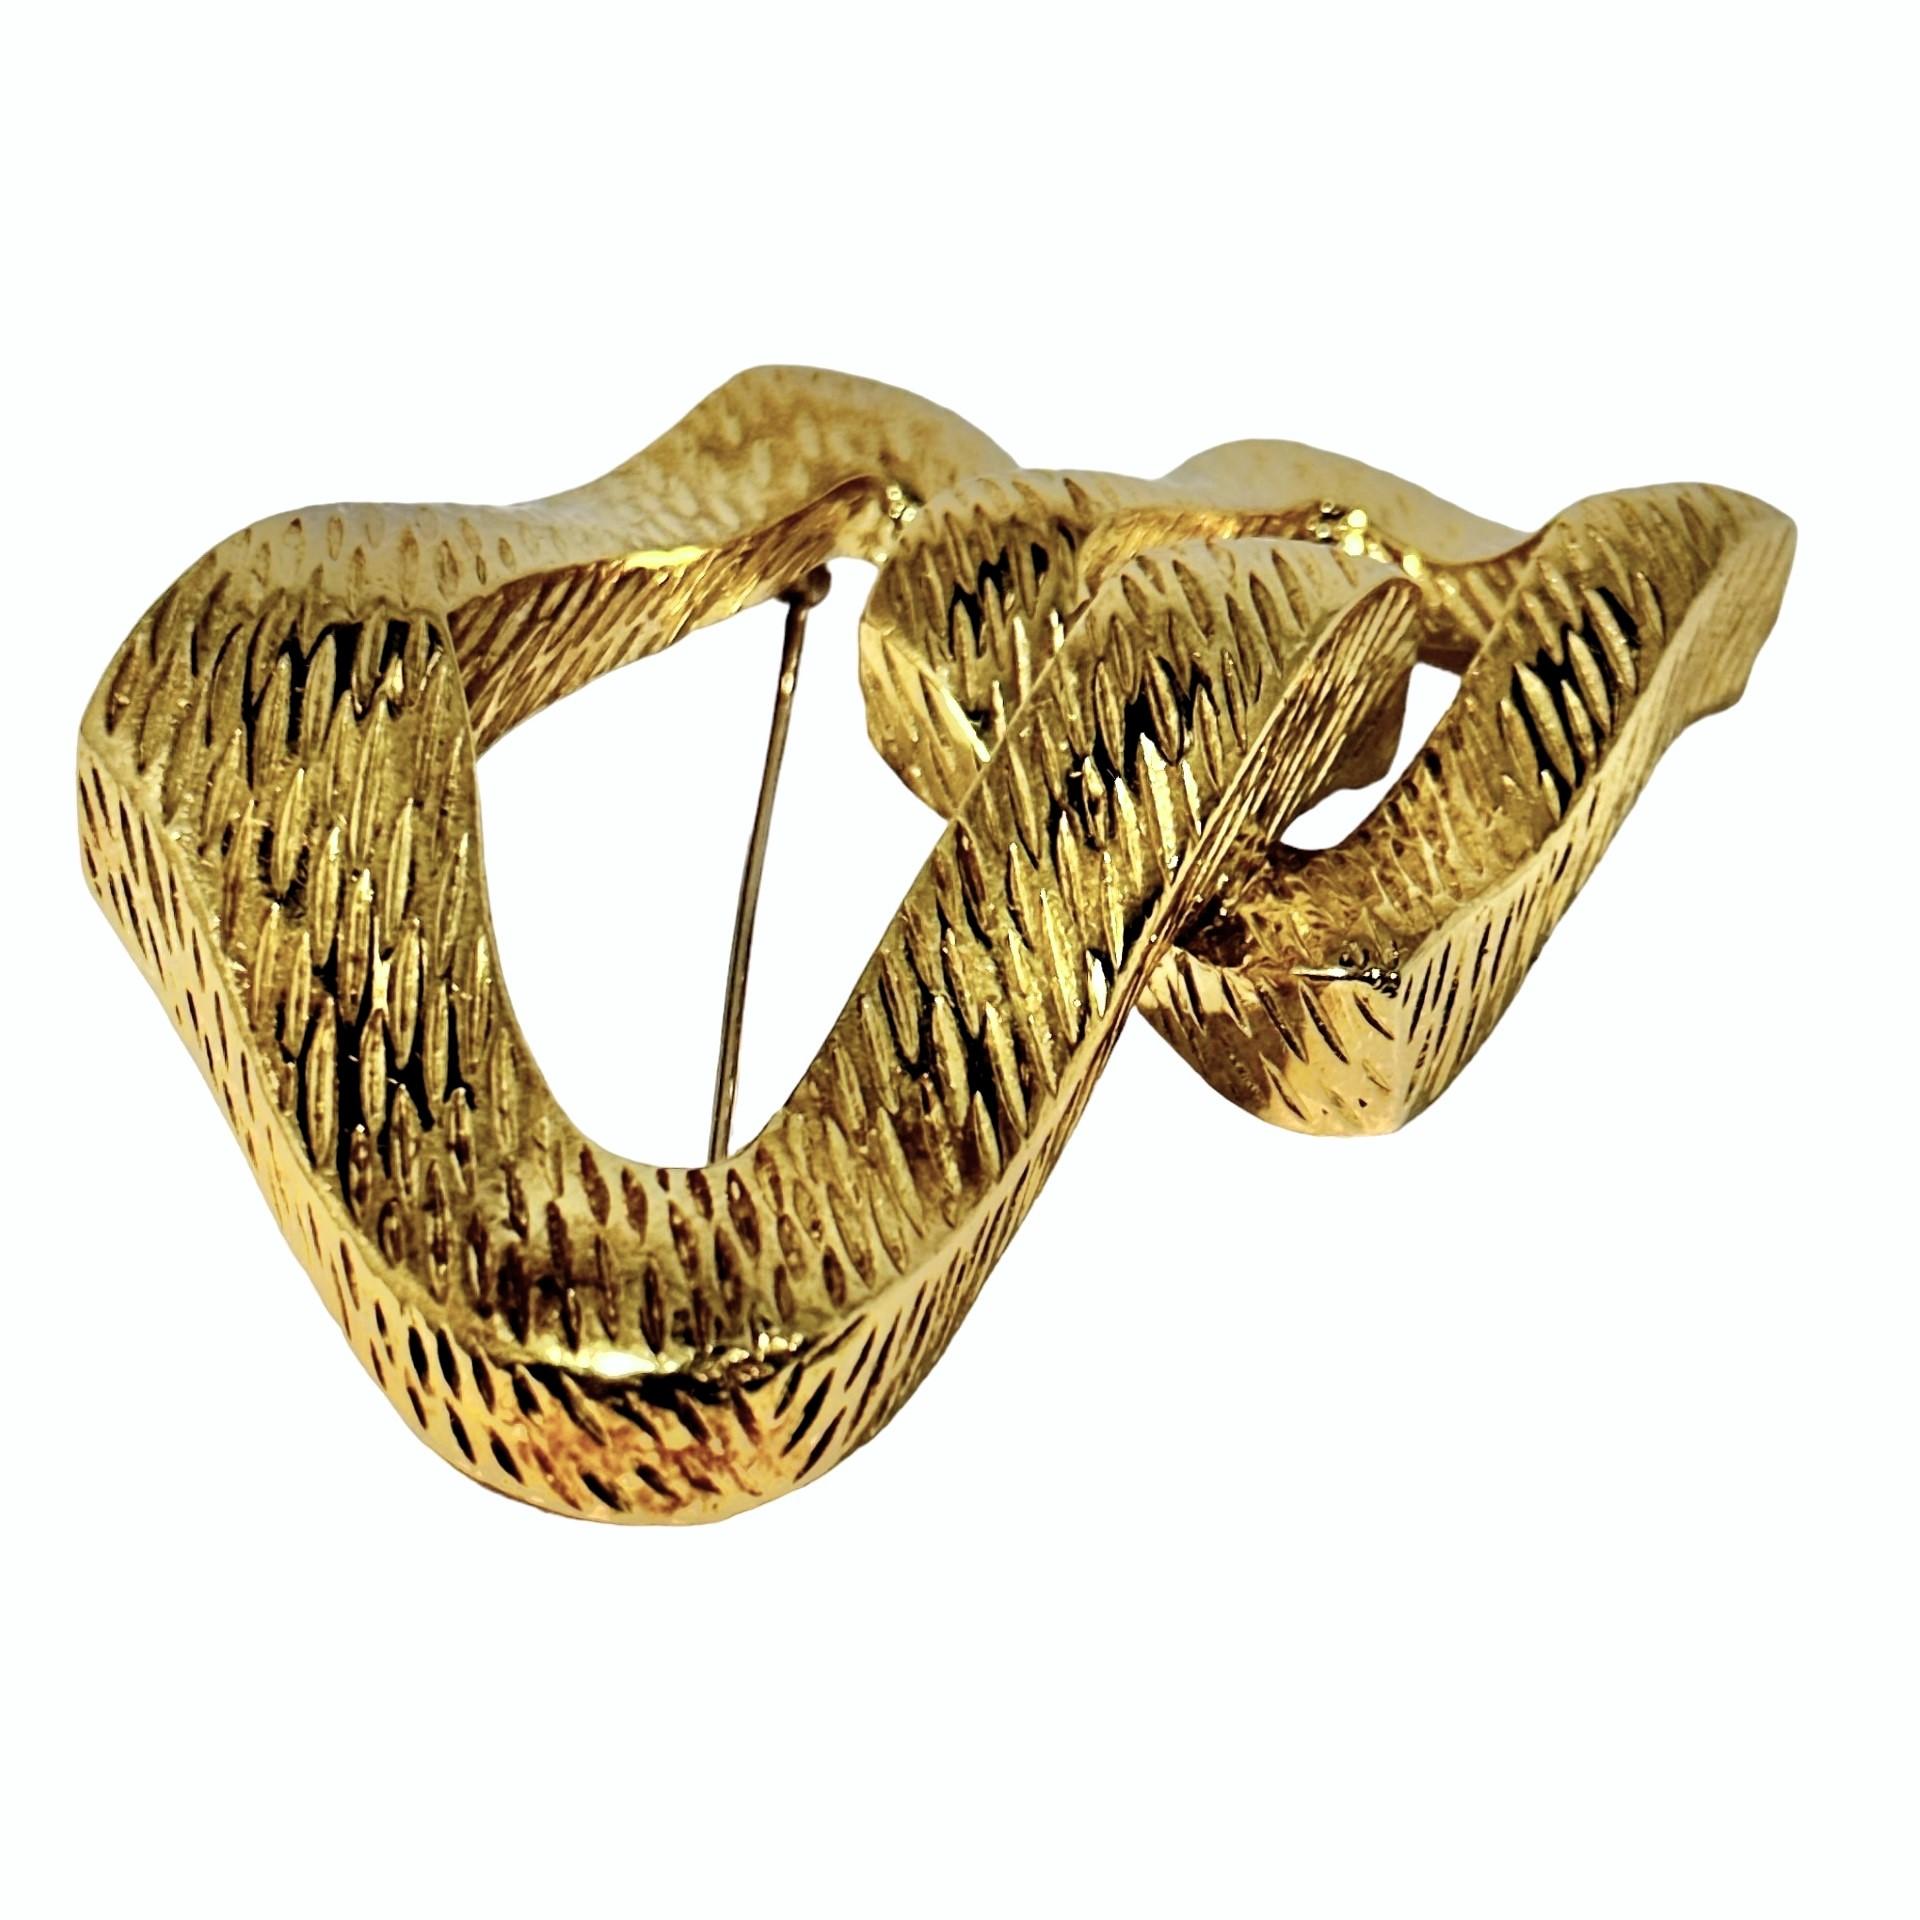 Women's 1960s-1970s French Bark Finish Gold Pendant Brooch by Wander 3 1/2 Inches Long  For Sale